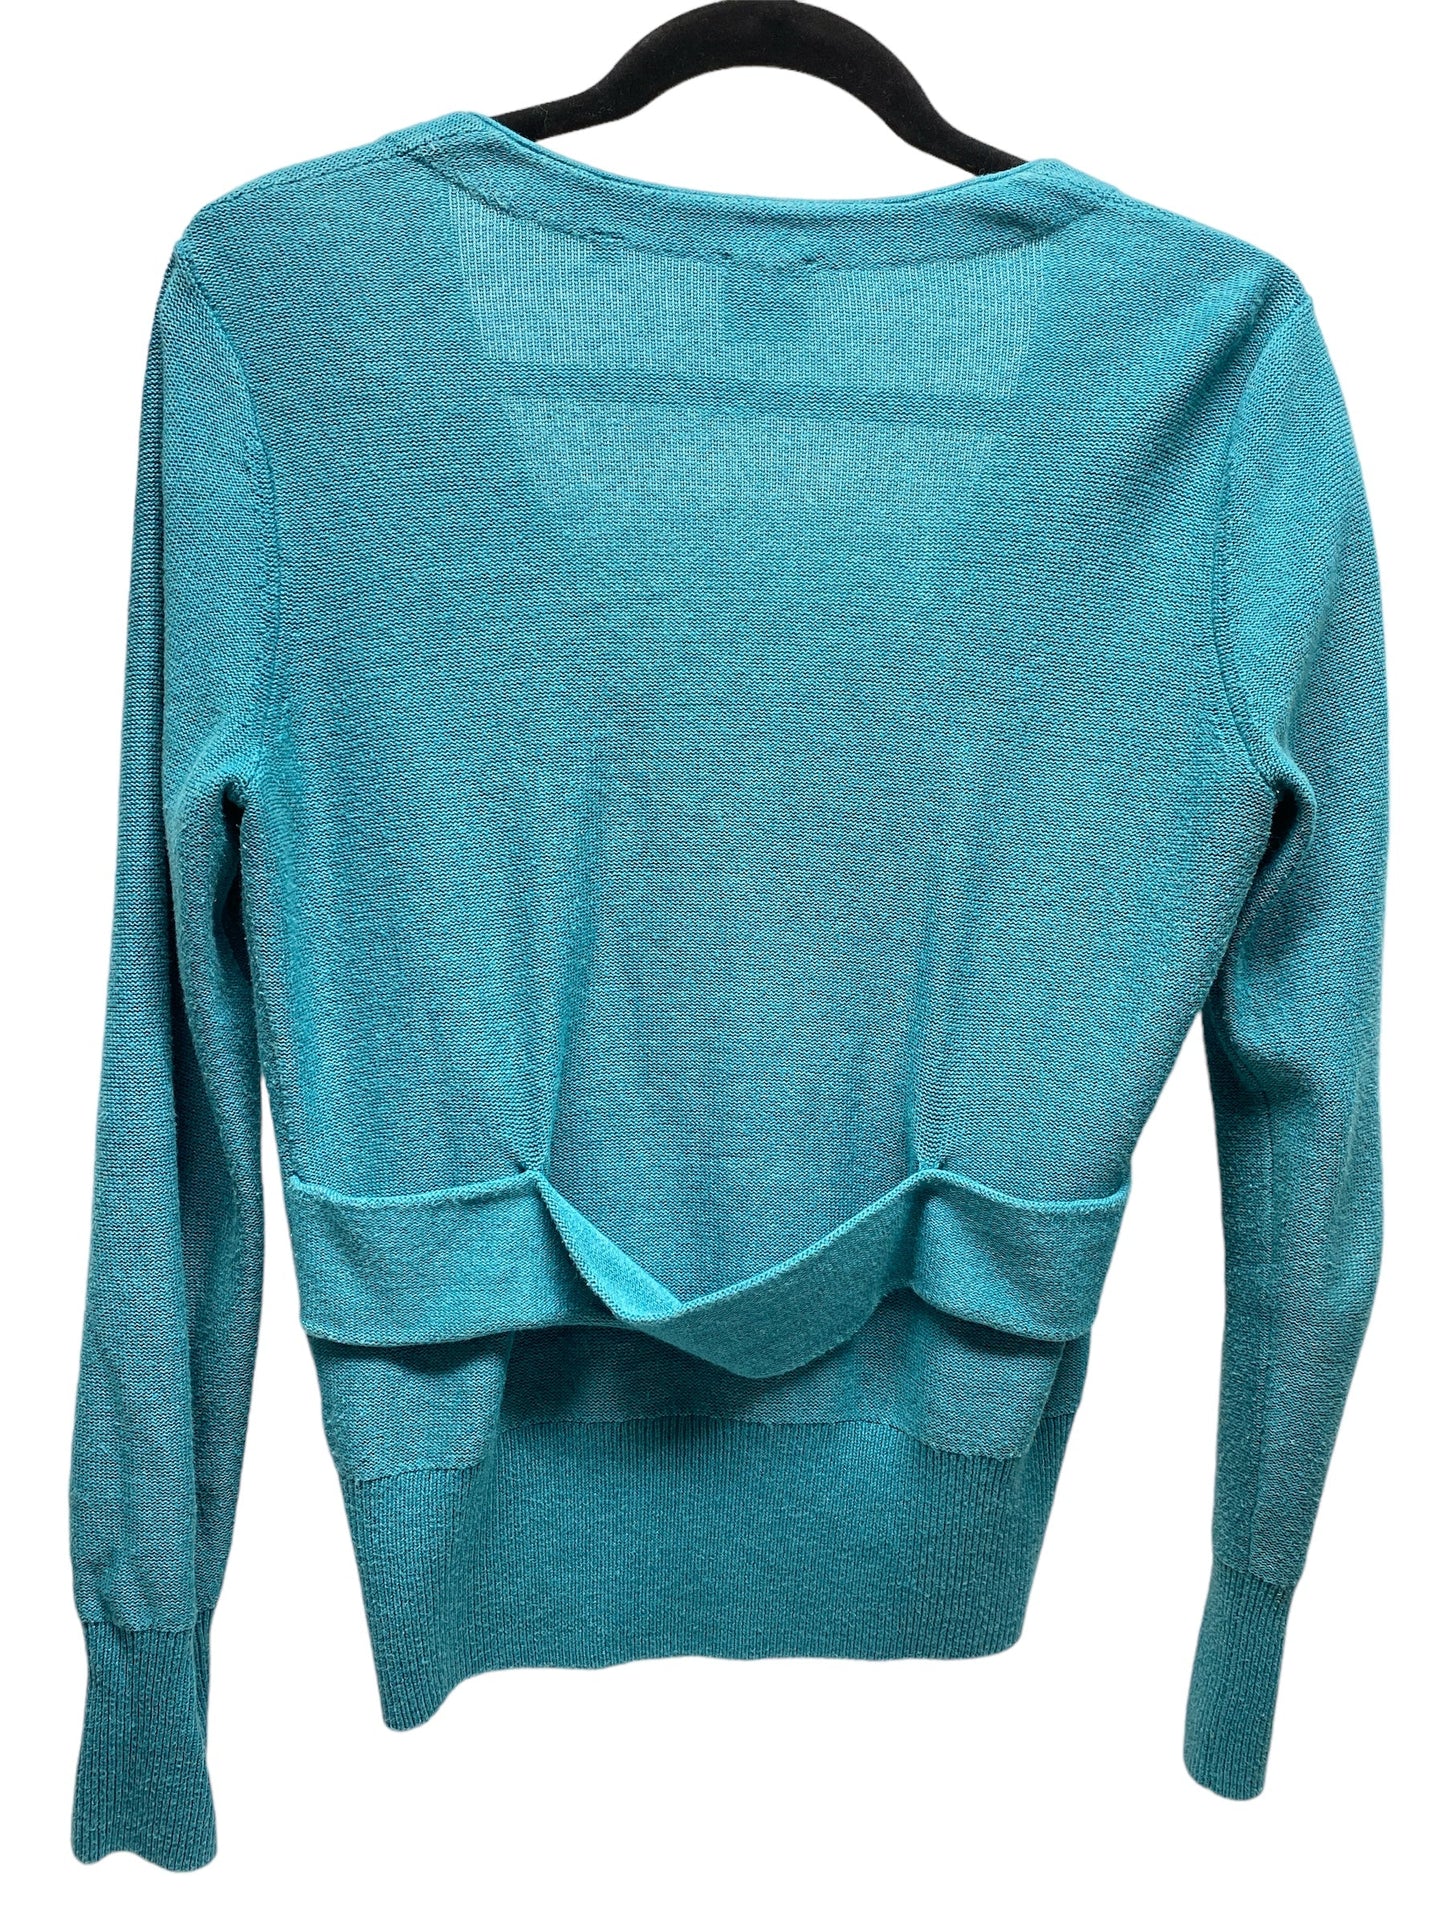 Sweater By Cabi  Size: S